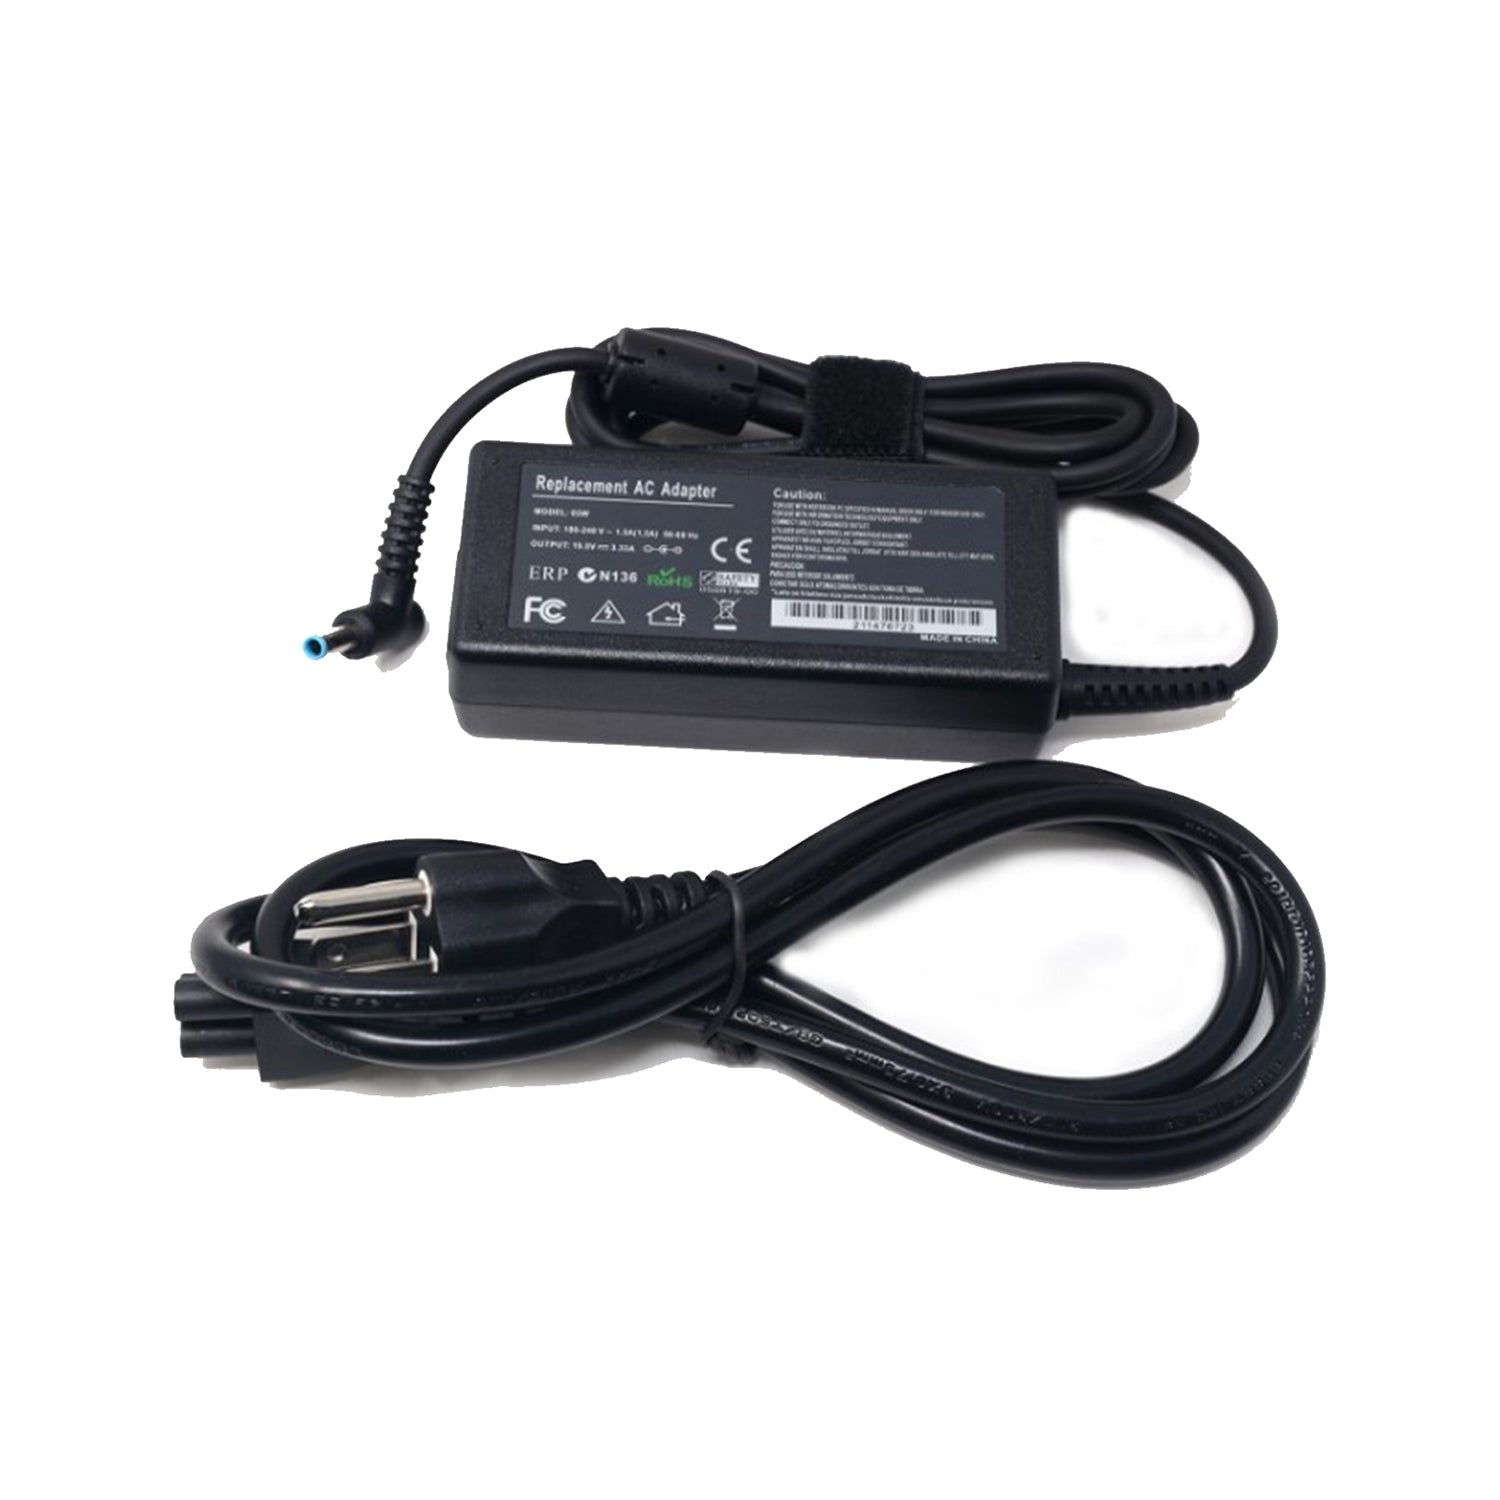 NEW 45W AC adapter charger for HP 19.5V 3.33A Laptop Power Adapter Compatible with HP ProBook 640 G2,650 G2,430 G3, 440 G3, 450 G3, HP Pavilion Touch Smart 14-q010nr, Sleek book